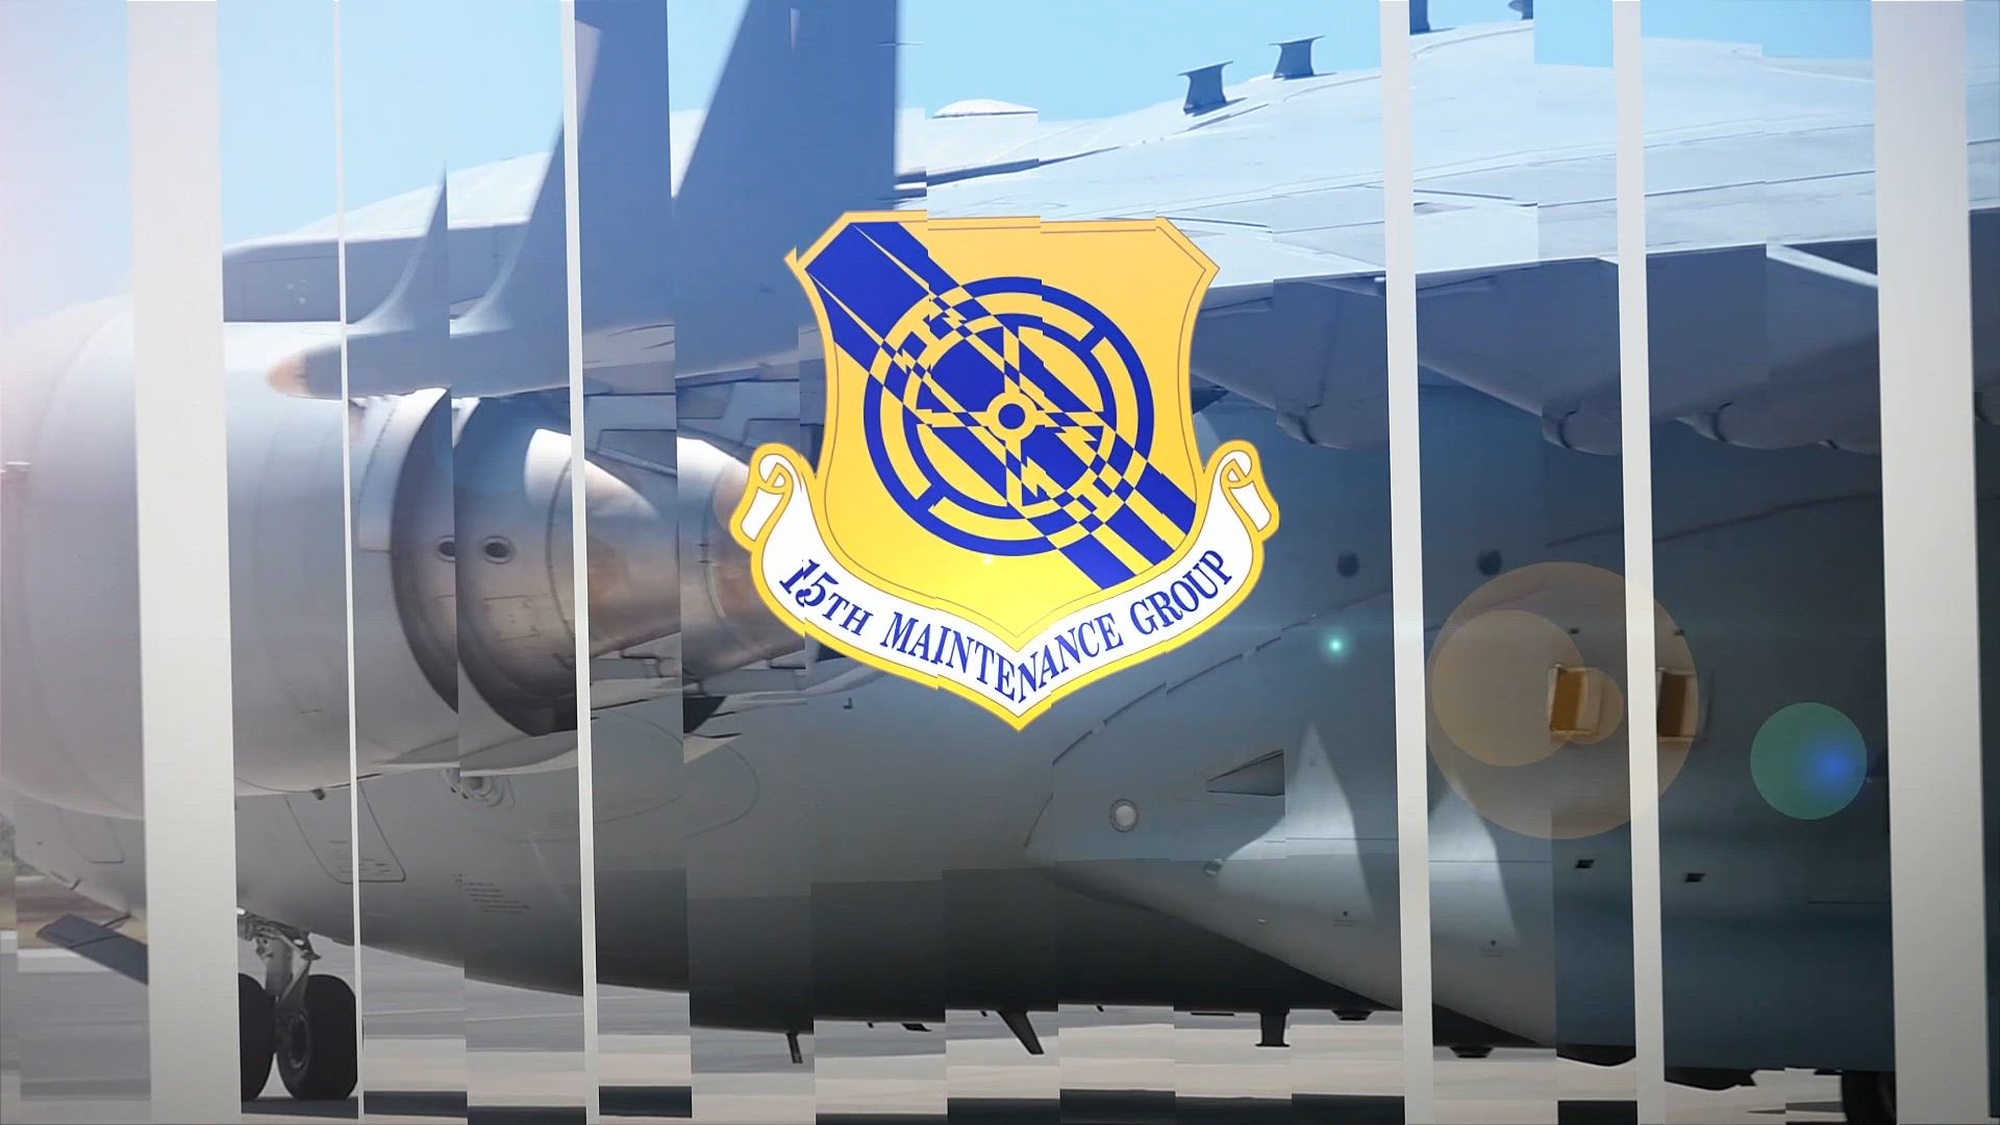 Non-stop maintenance

Building up to MXG appreciation week, TSgt Anthony Lloyd recently shared his thoughts on being a maintainer and provided some insight on anyone new coming into the aircraft sustainment career field.